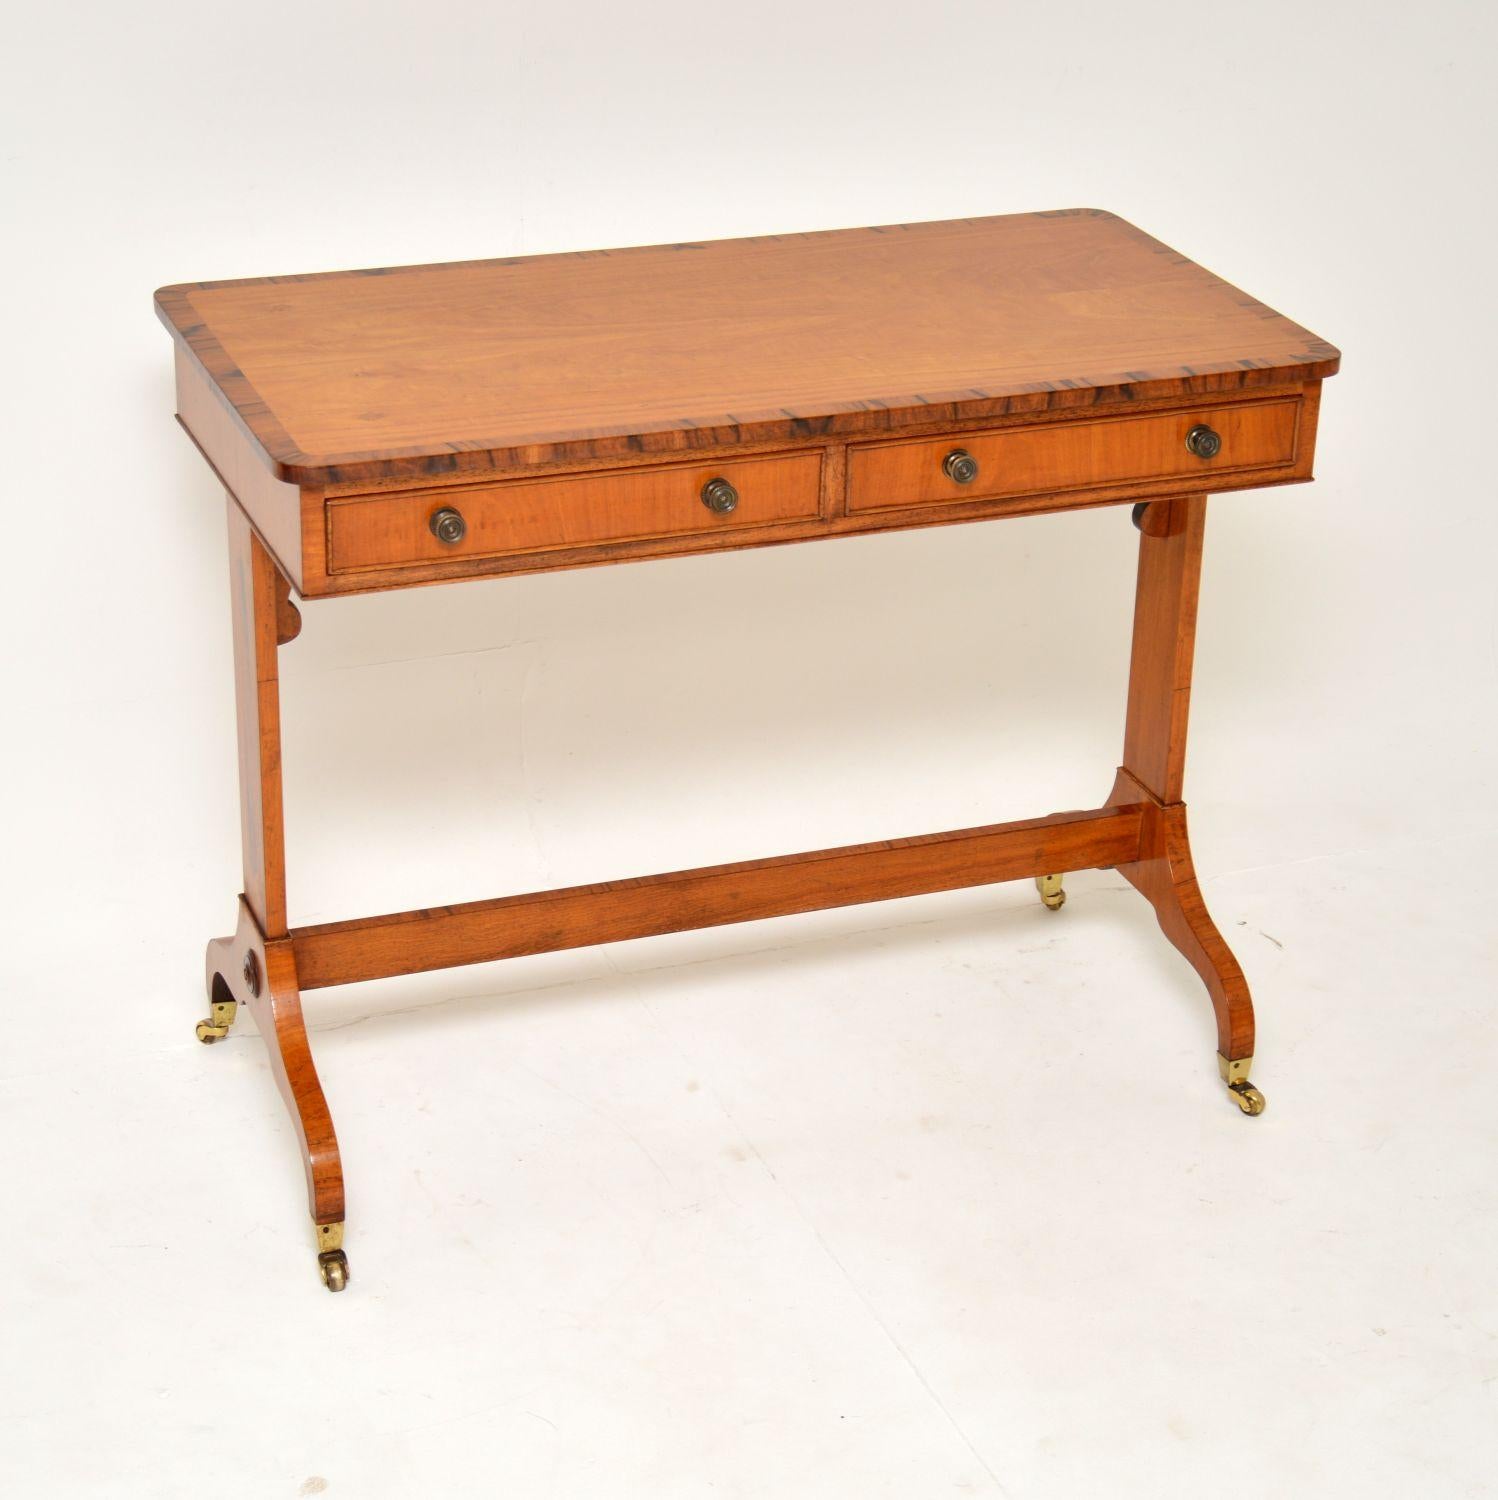 An absolutely stunning antique Regency style writing table in satin wood. This was made in England, it dates from around the 1950’s.

The quality is amazing and this is a lovely size. It has two drawers on the front and two dummy drawers on the